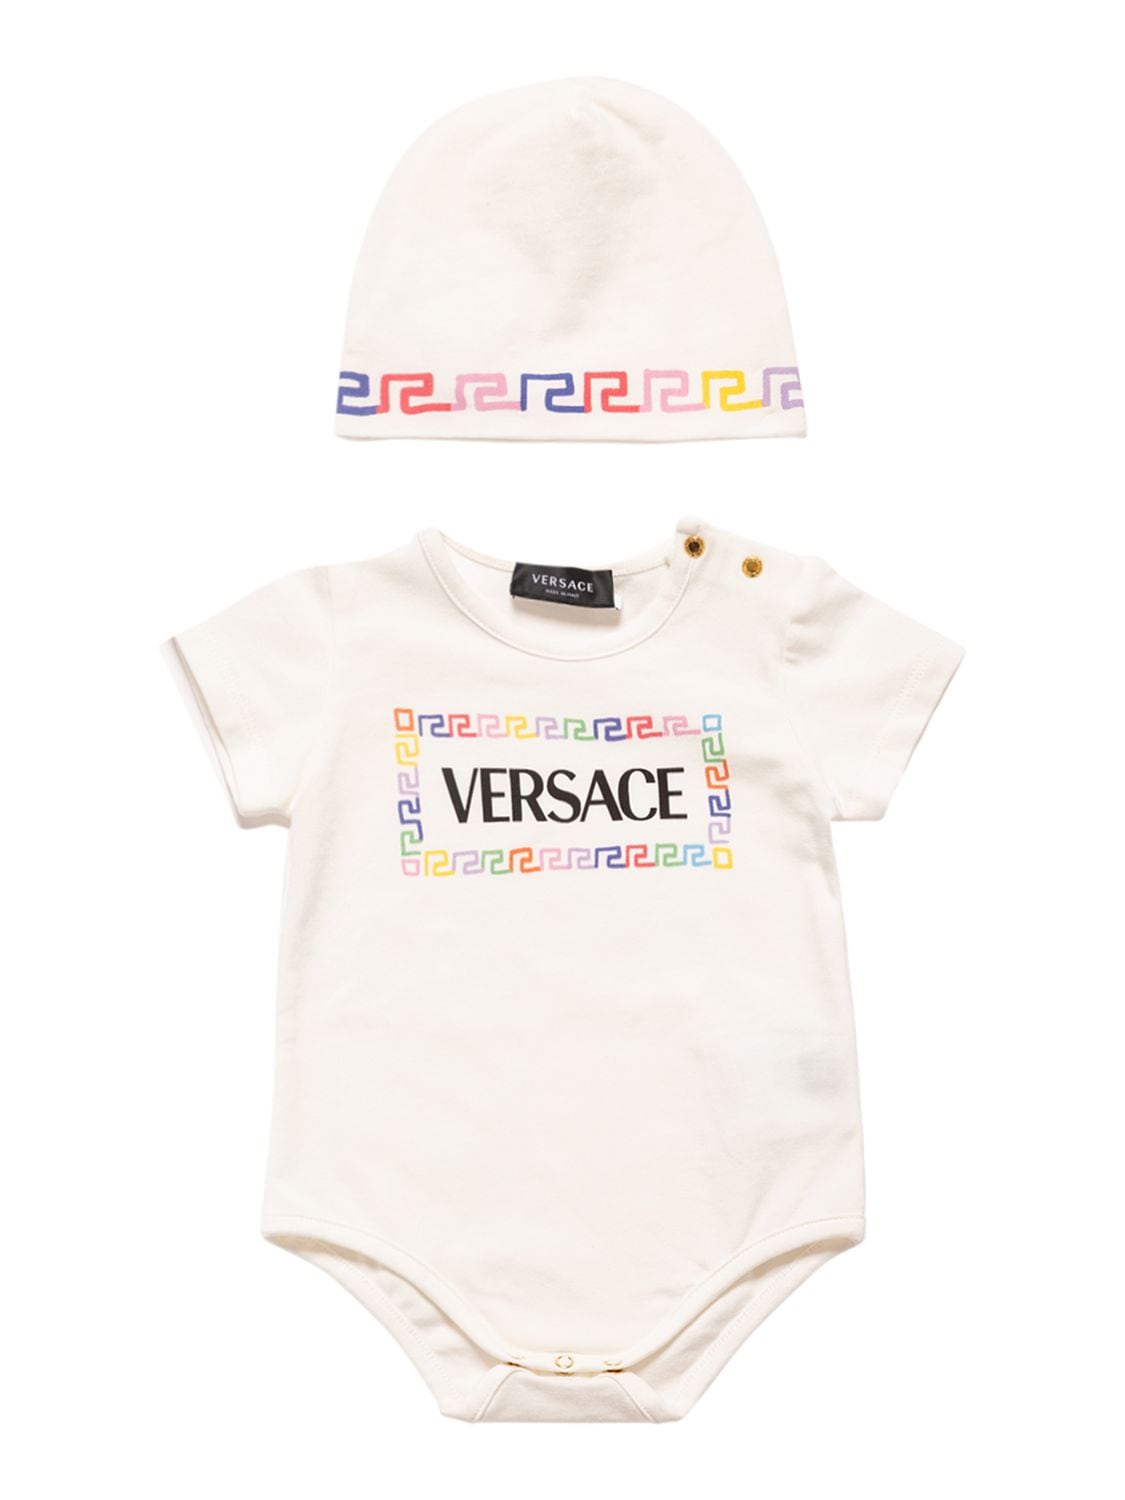 Versace Babies' Printed Cotton Jersey Bodysuit & Hat In White